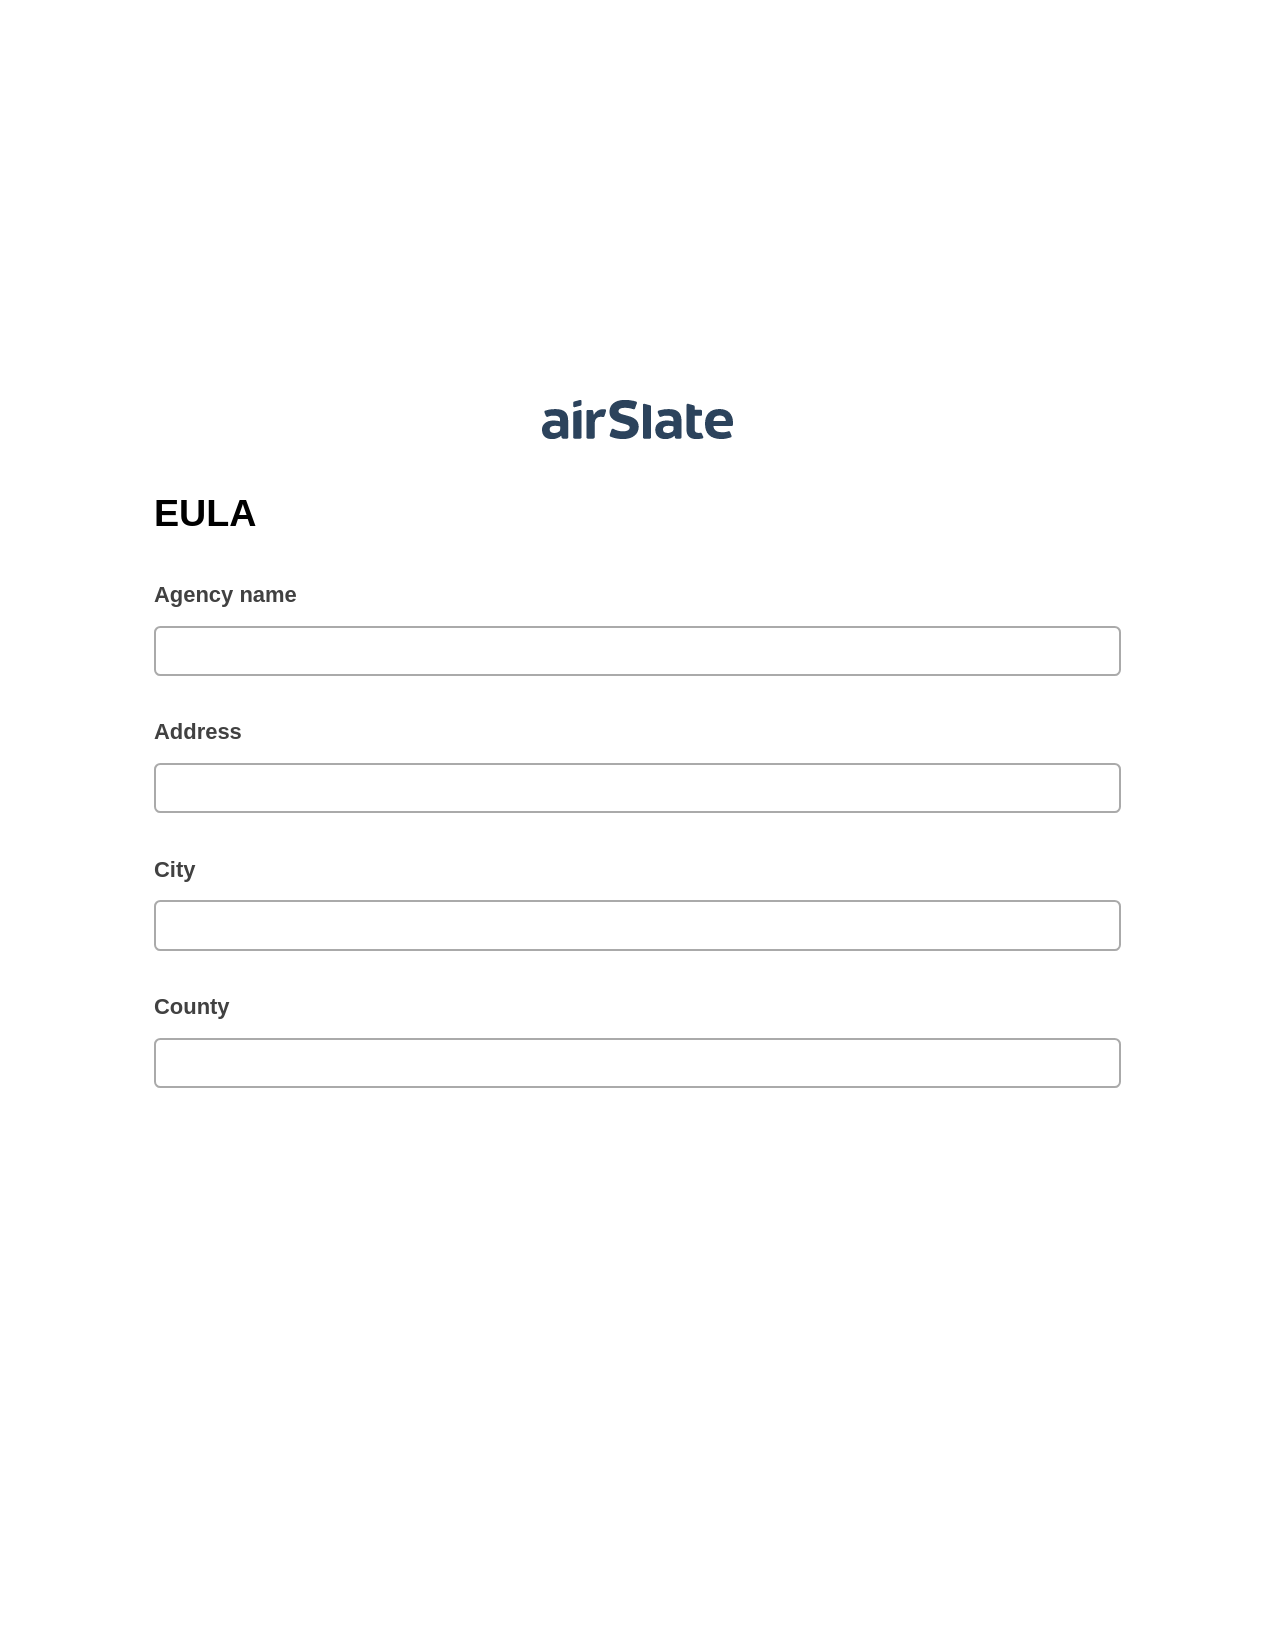 EULA Pre-fill from another Slate Bot, 1Create Slate every Google Sheet Update Bot, Archive to SharePoint Folder Bot